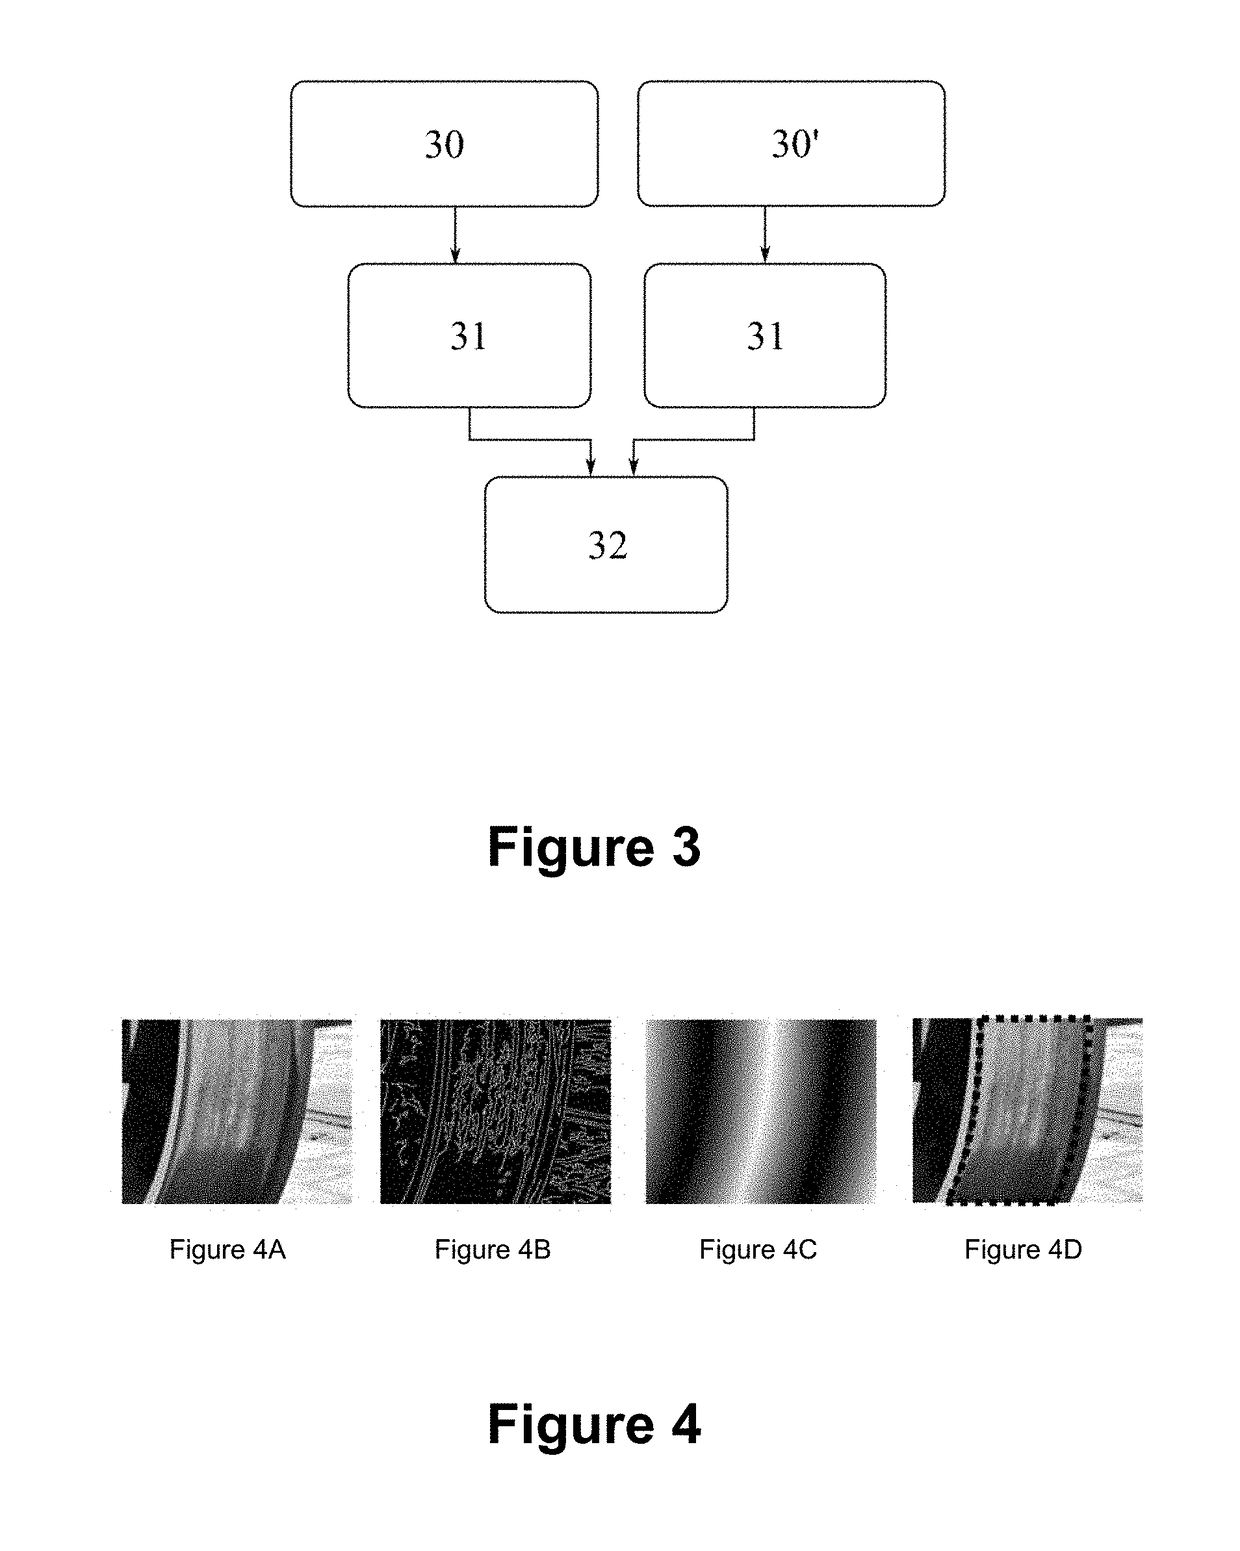 Railway wheels monitoring system and method